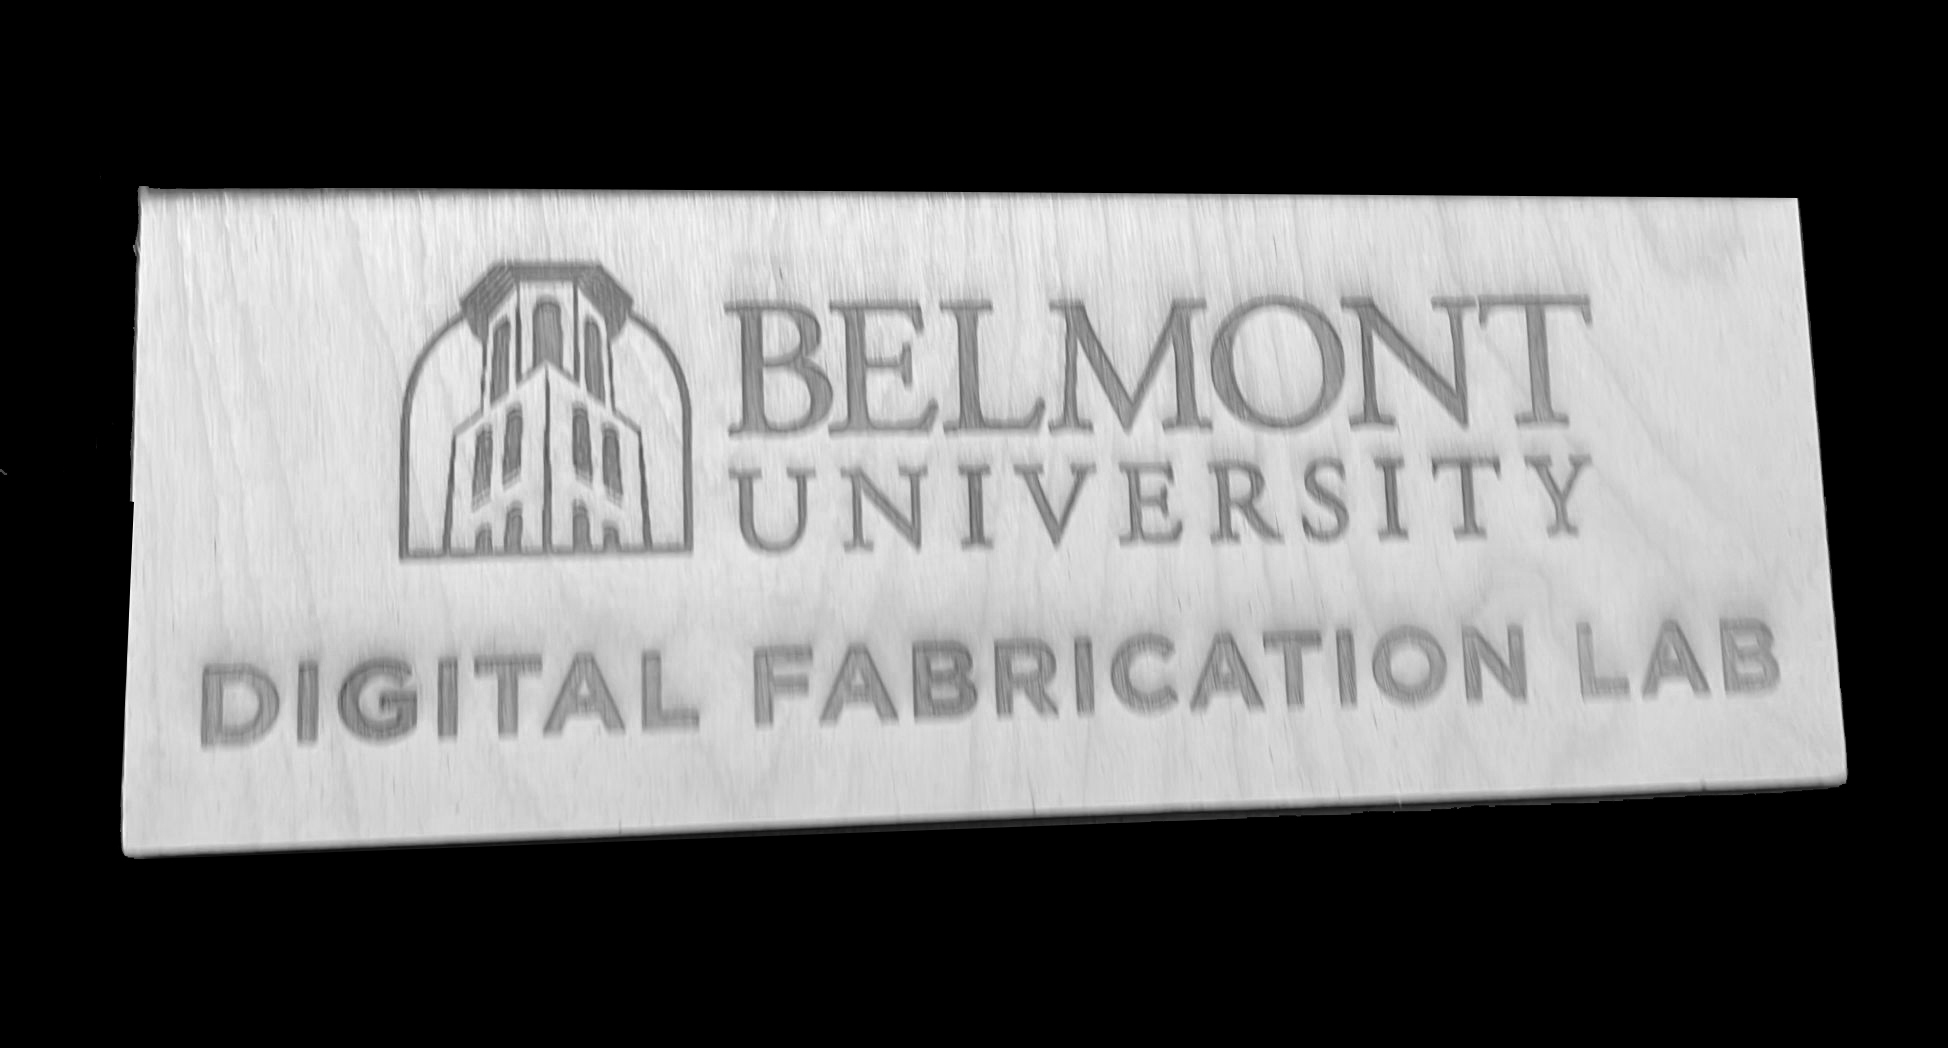 A picture of a fabricated placard with Belmont University logo and Digital Fabrication Lab